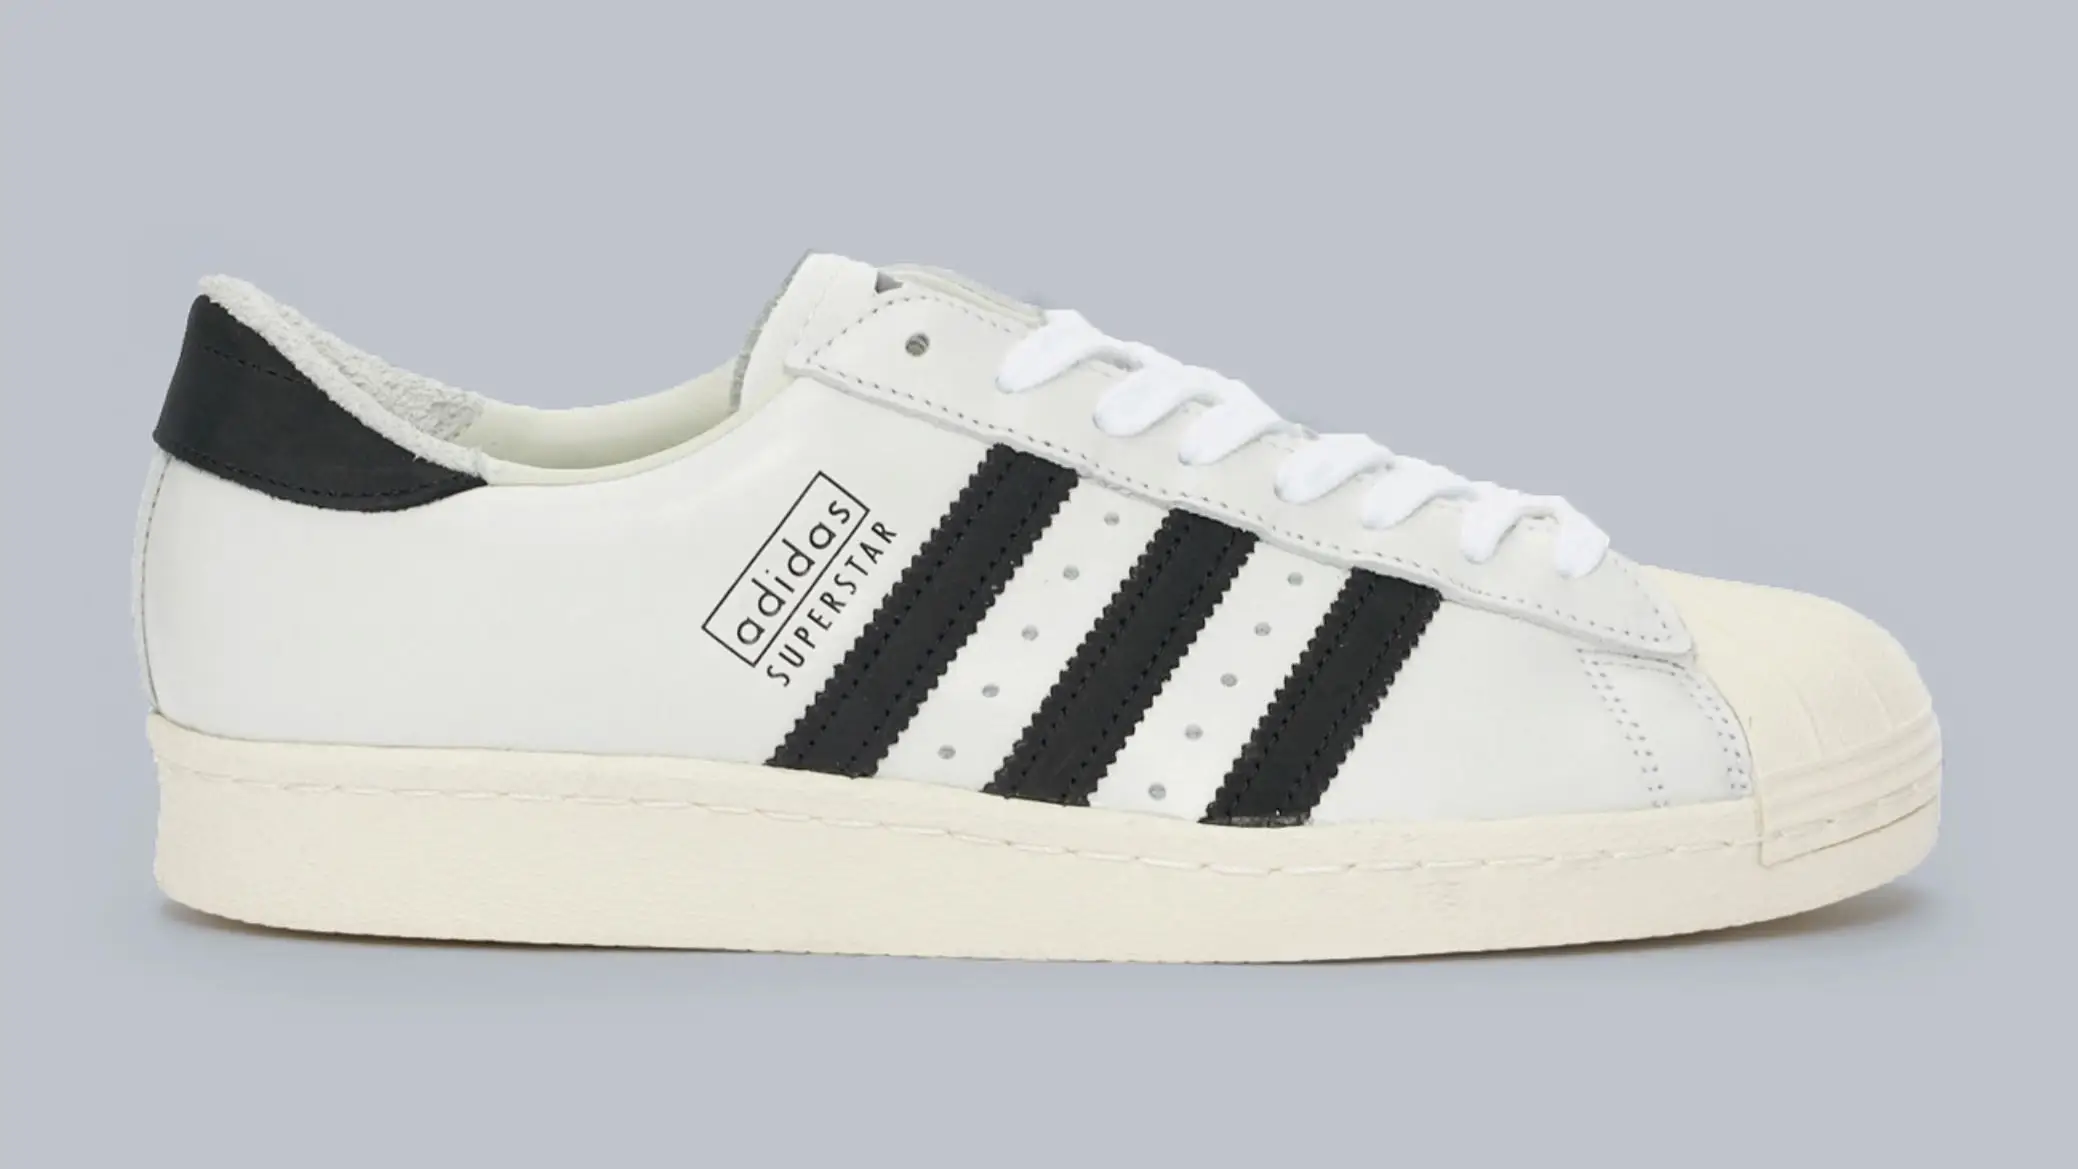 Keep It Classic In This Luxury adidas Superstar 80s Recon | The Sole ...